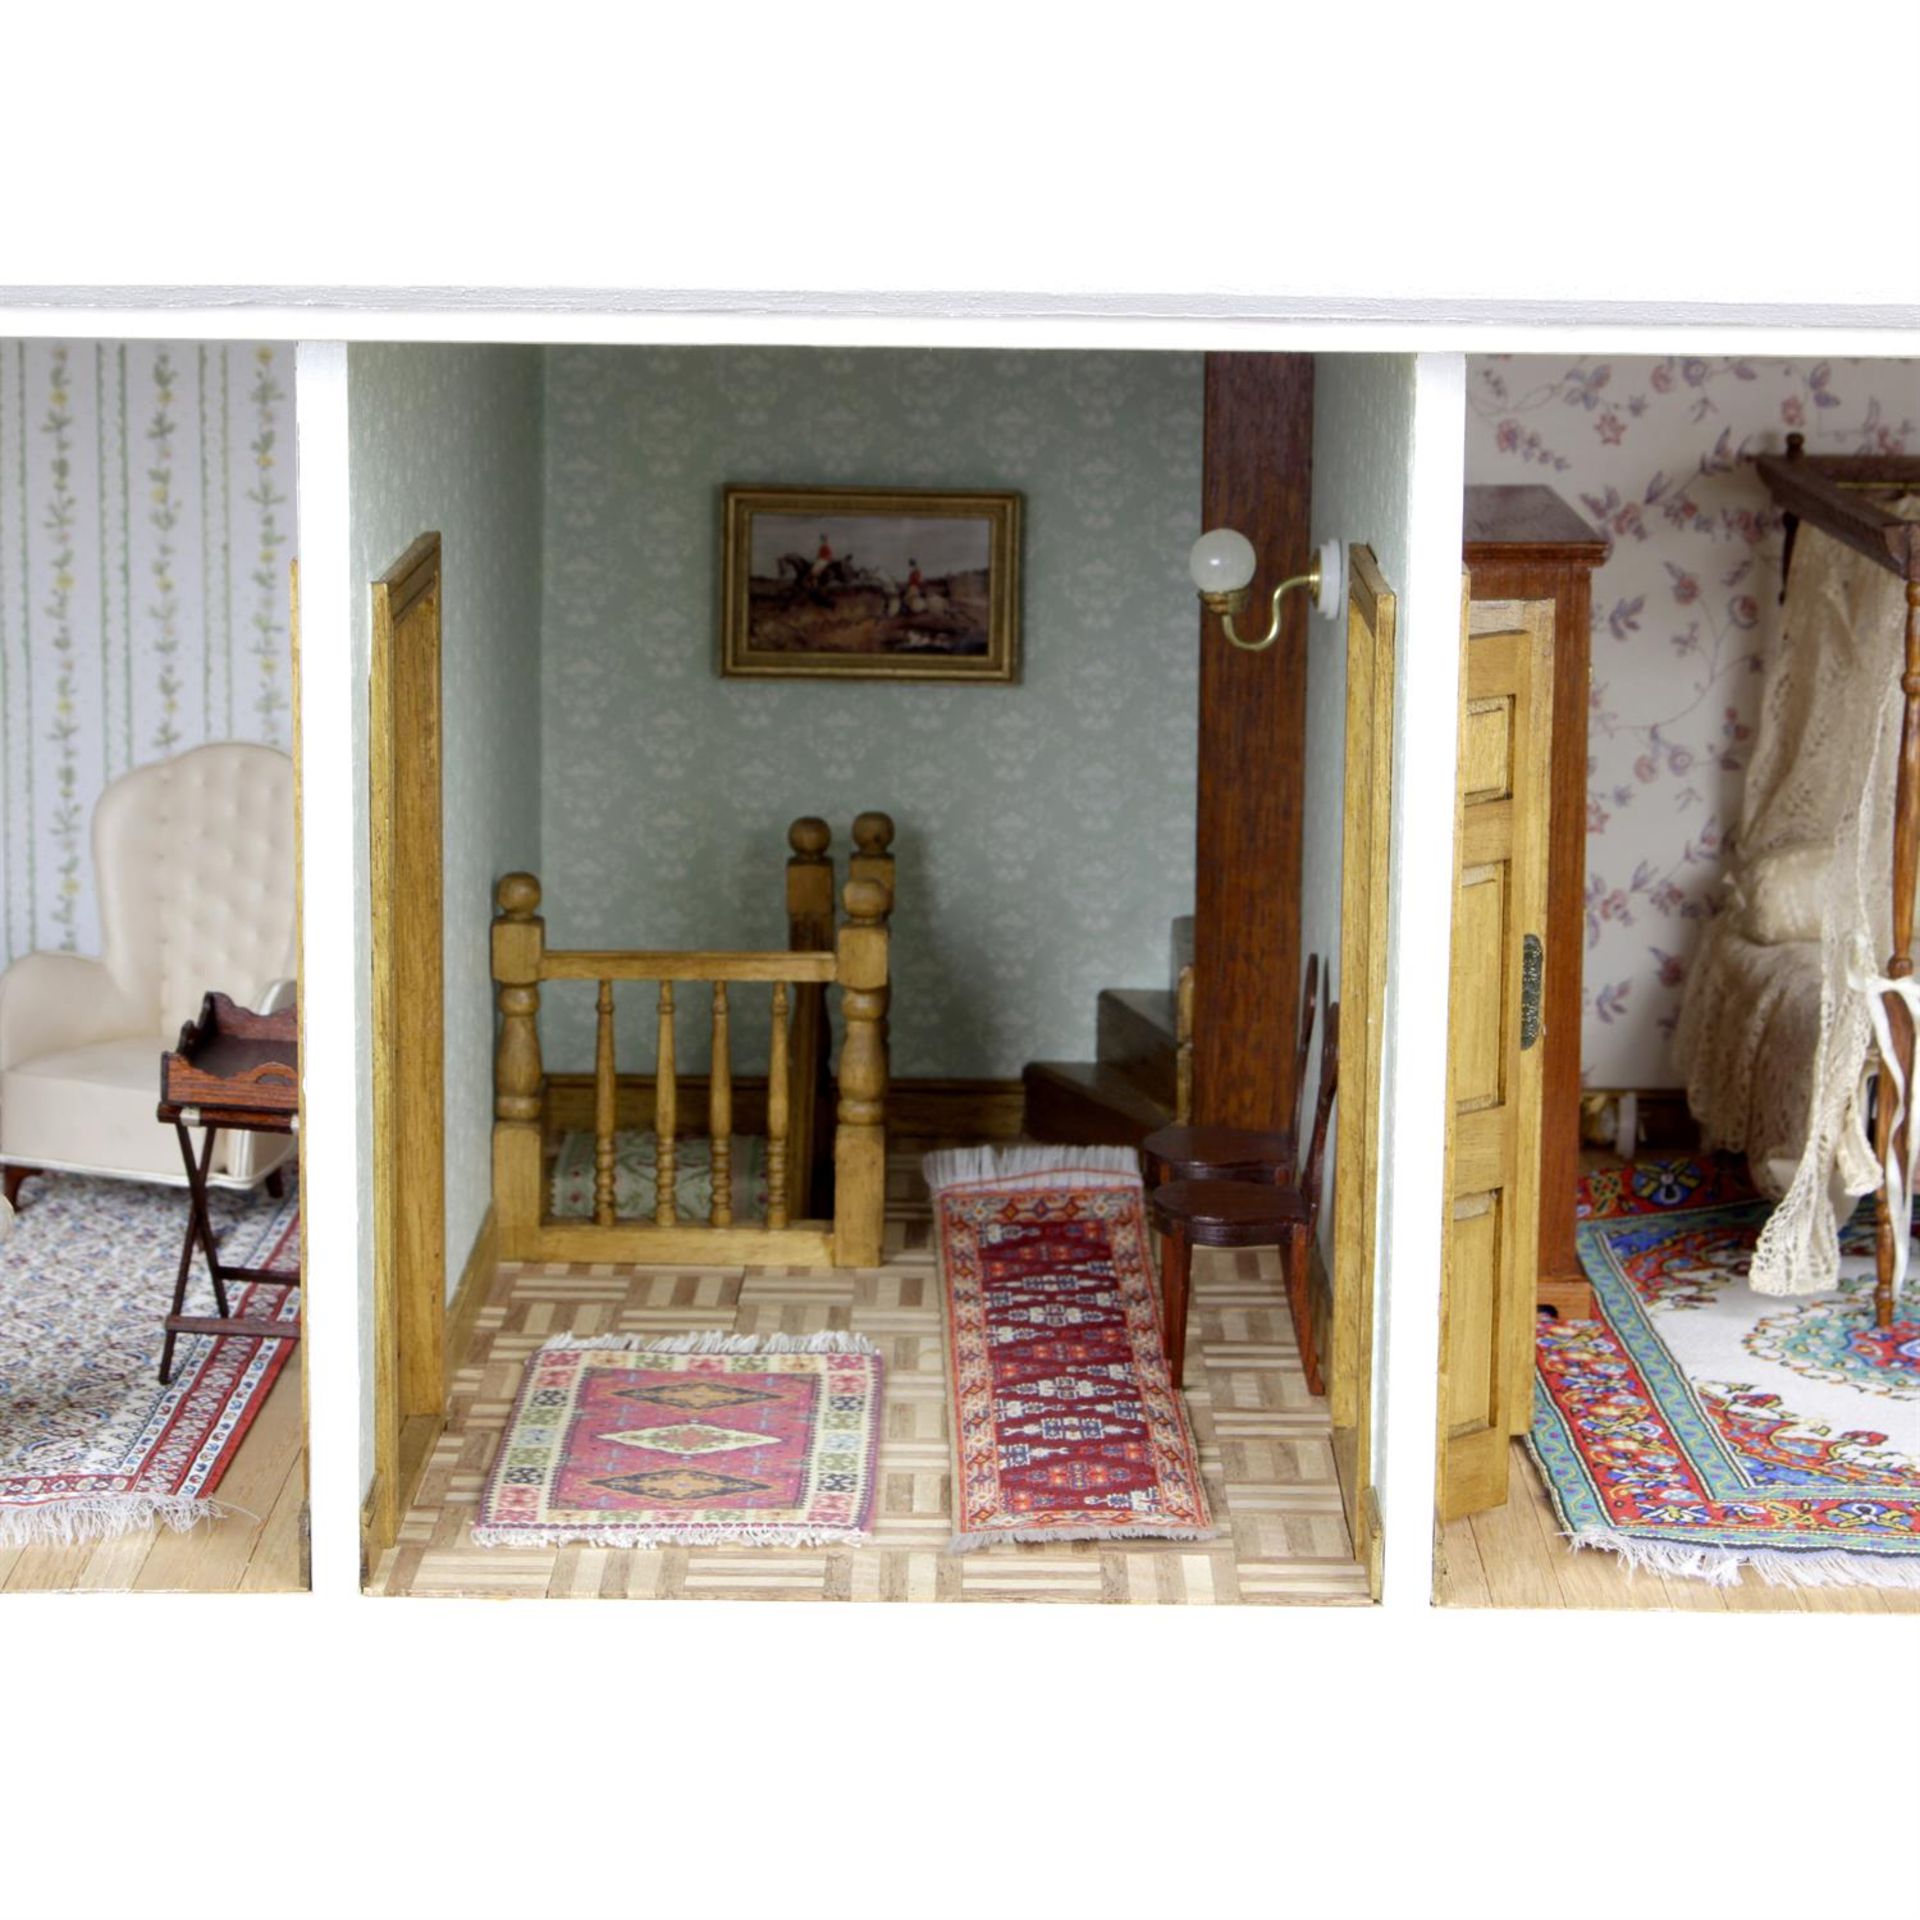 A large wooden dolls house. - Image 4 of 8